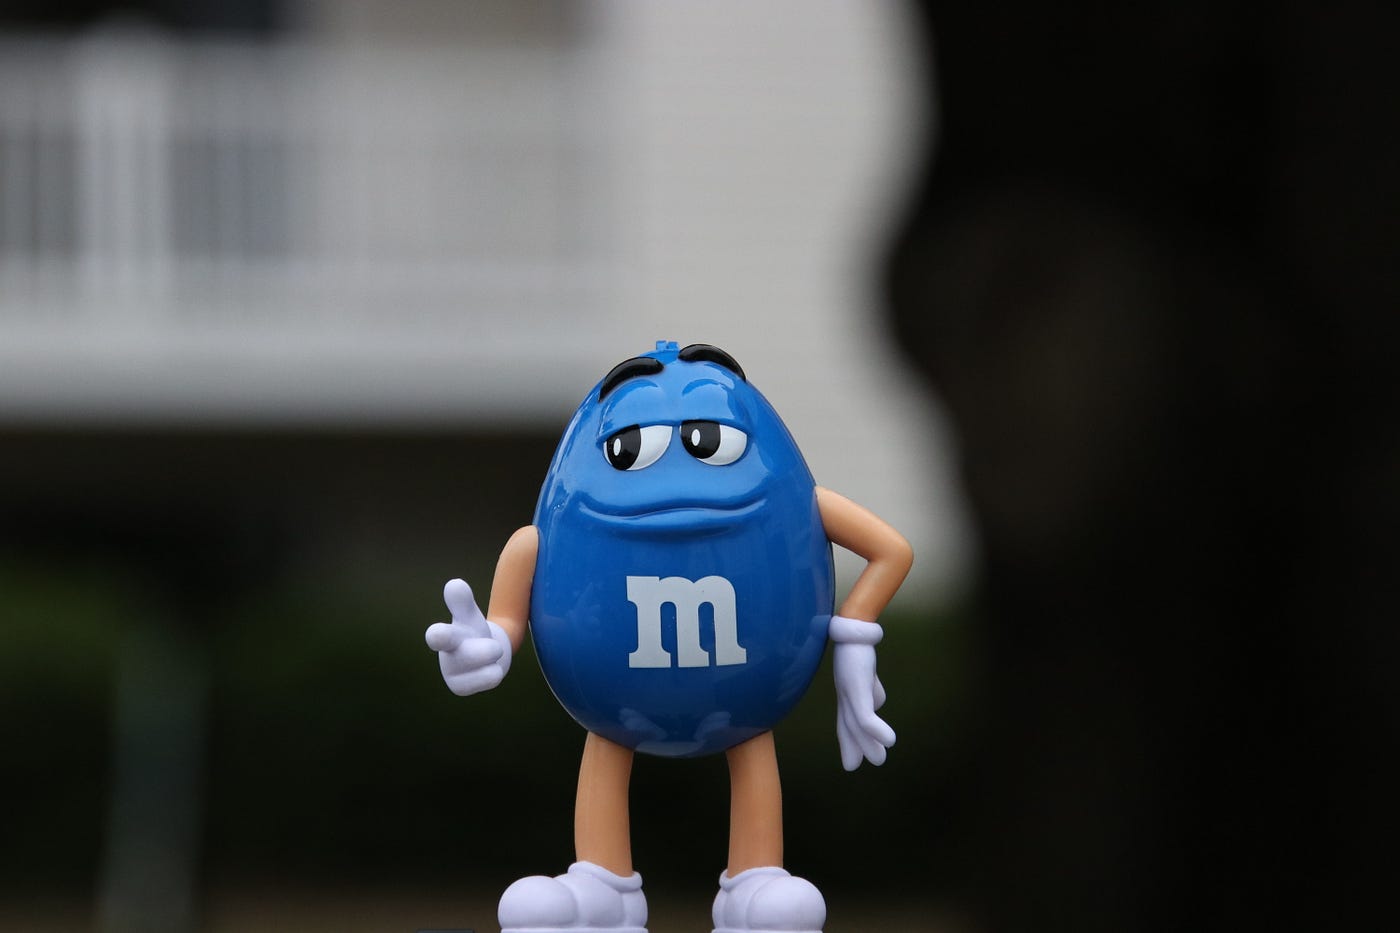 7 Things You Should Know Before You Eat M&Ms